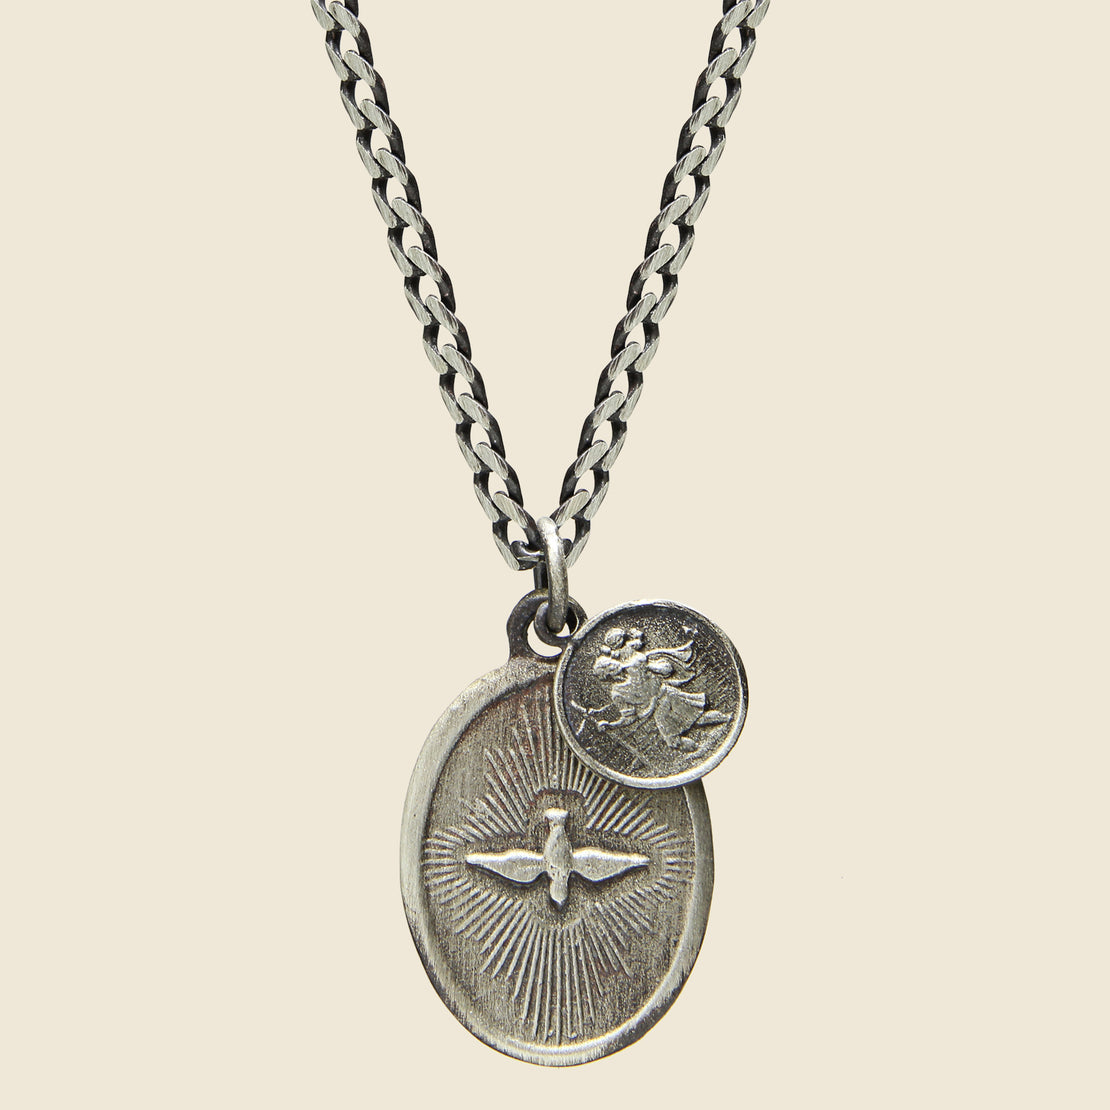 Dove Pendant Necklace - Polished Silver